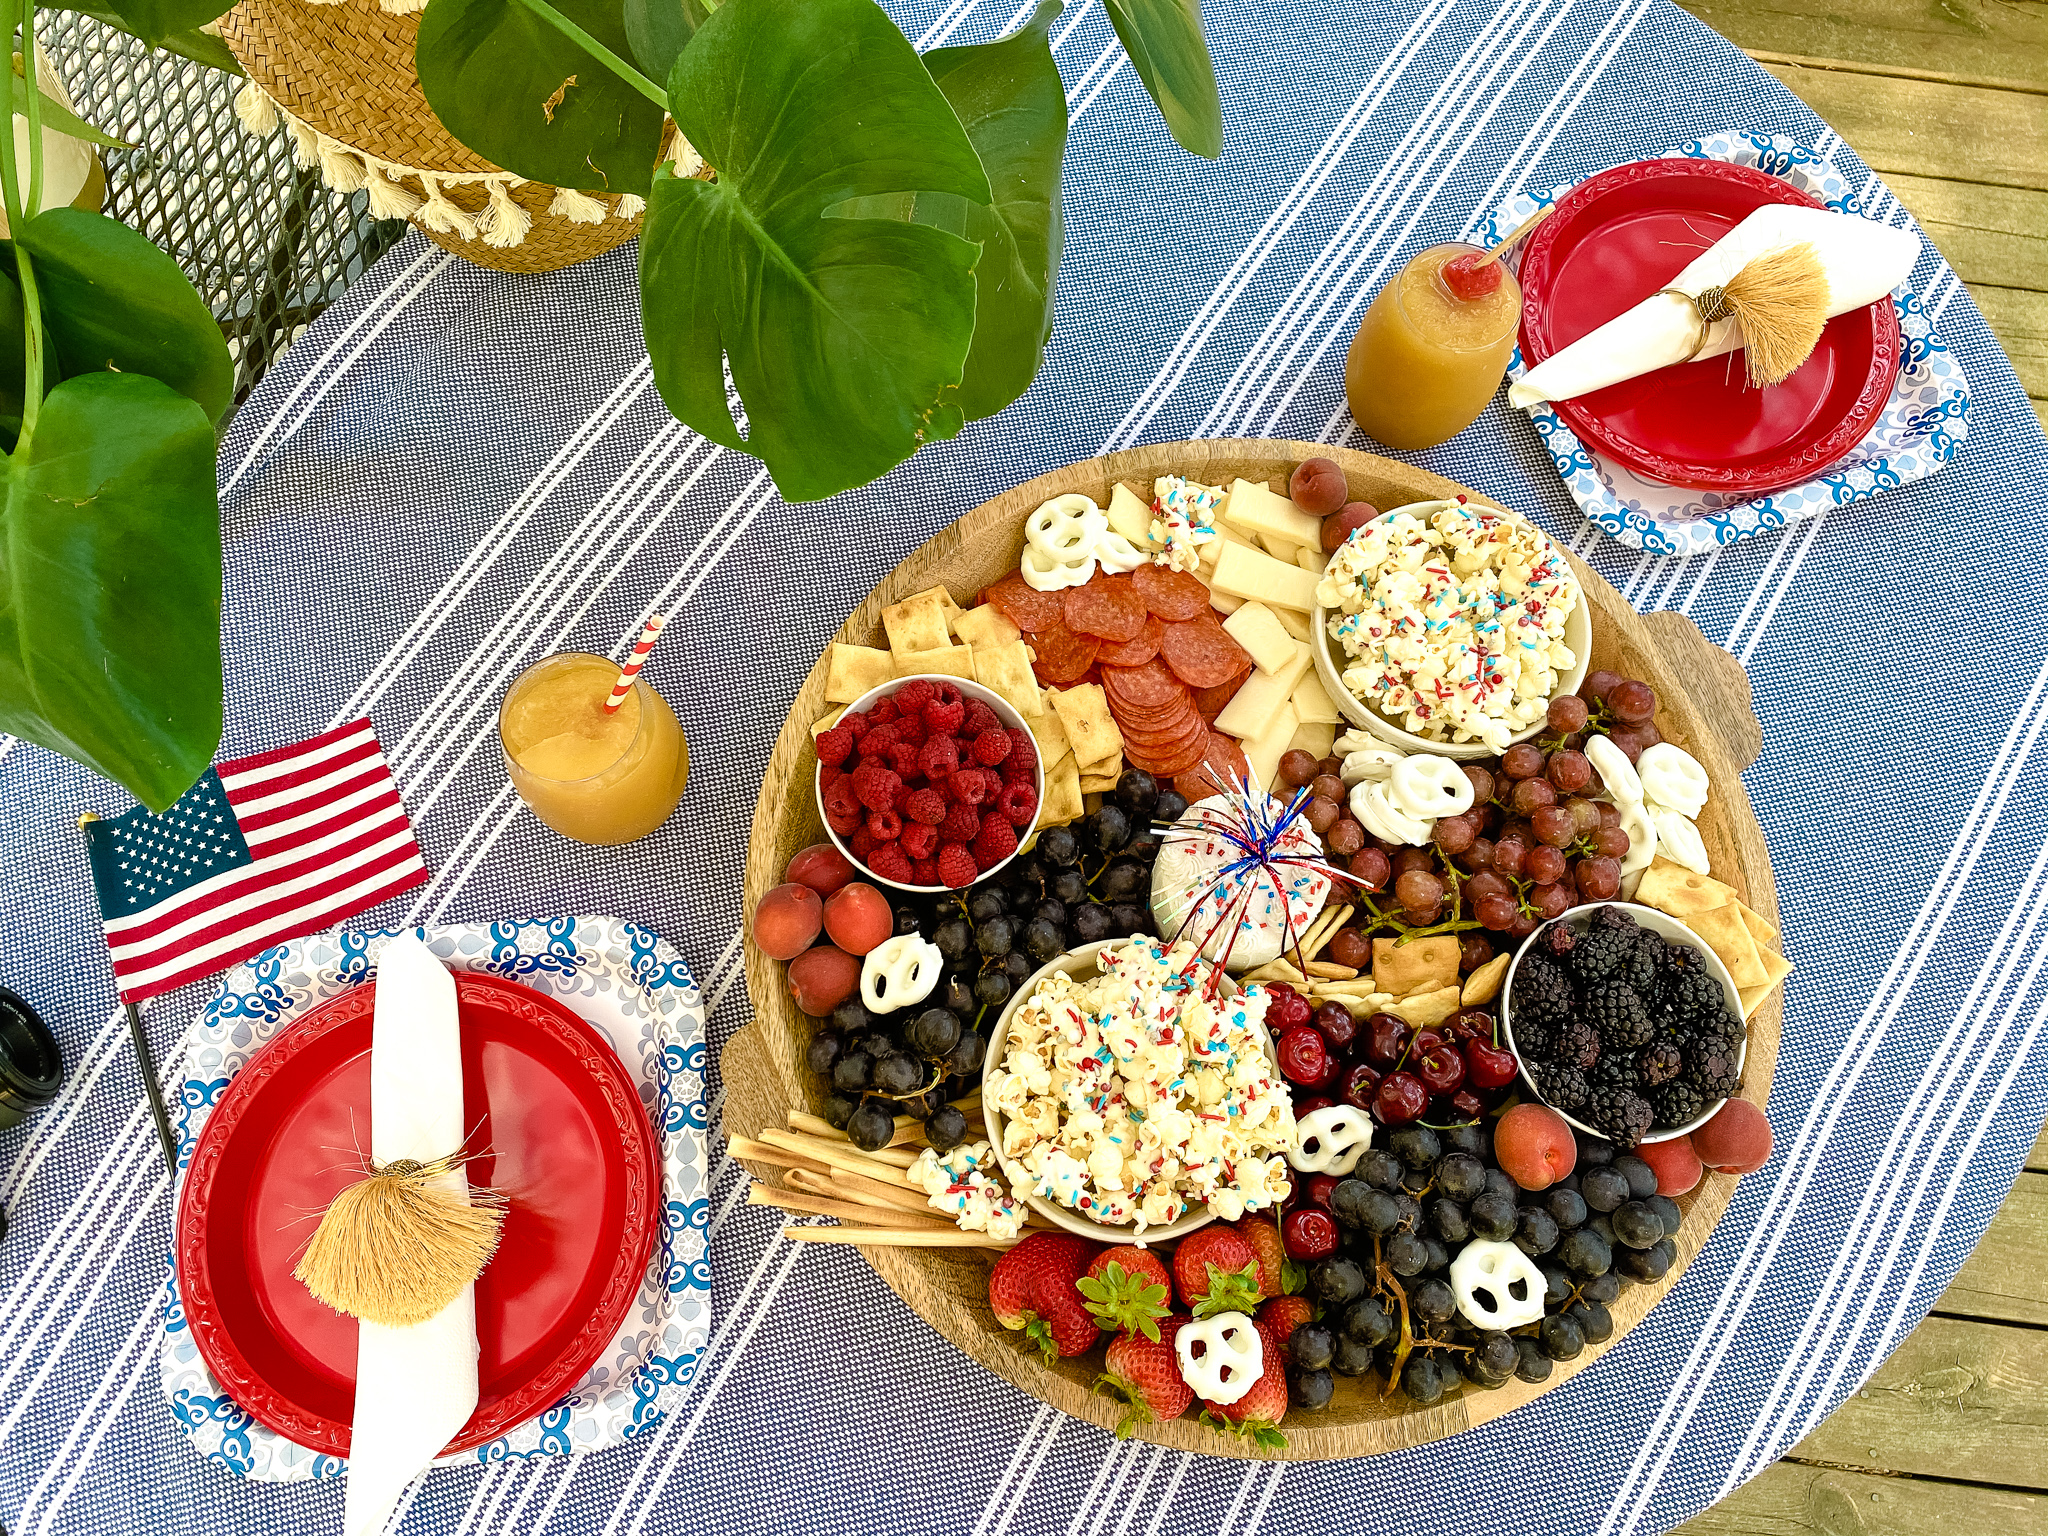 Top down view of 4th of July charcuterie board featuring red, white and blue foods.